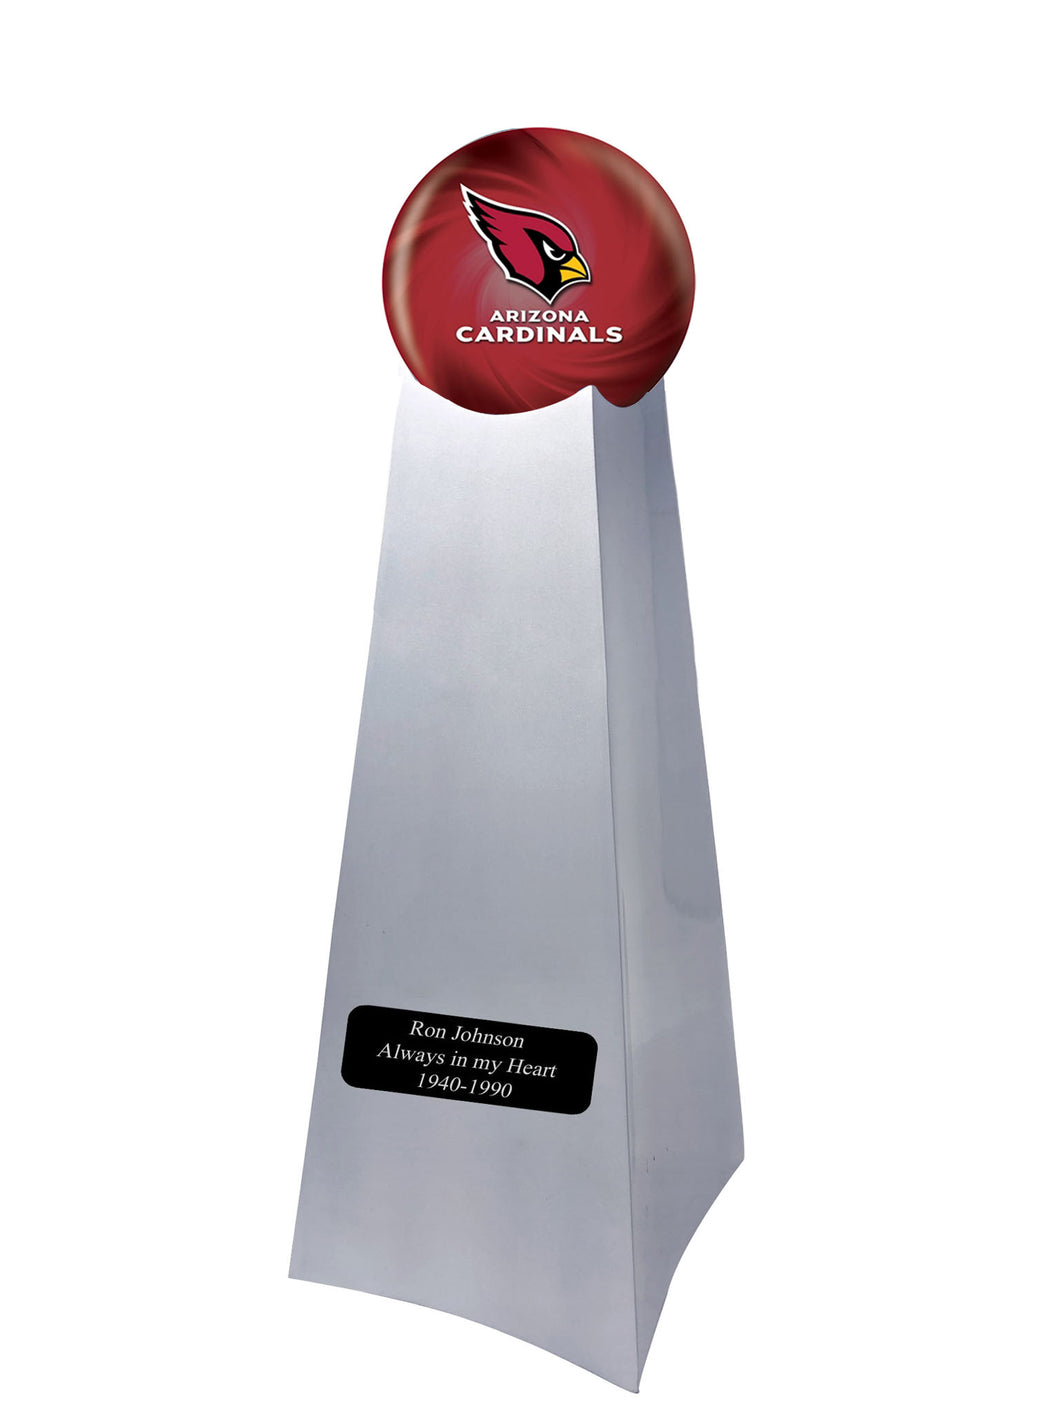 Championship Trophy Cremation Urn with Add on Arizona Cardinals Ball Decor and Custom Metal Plaque